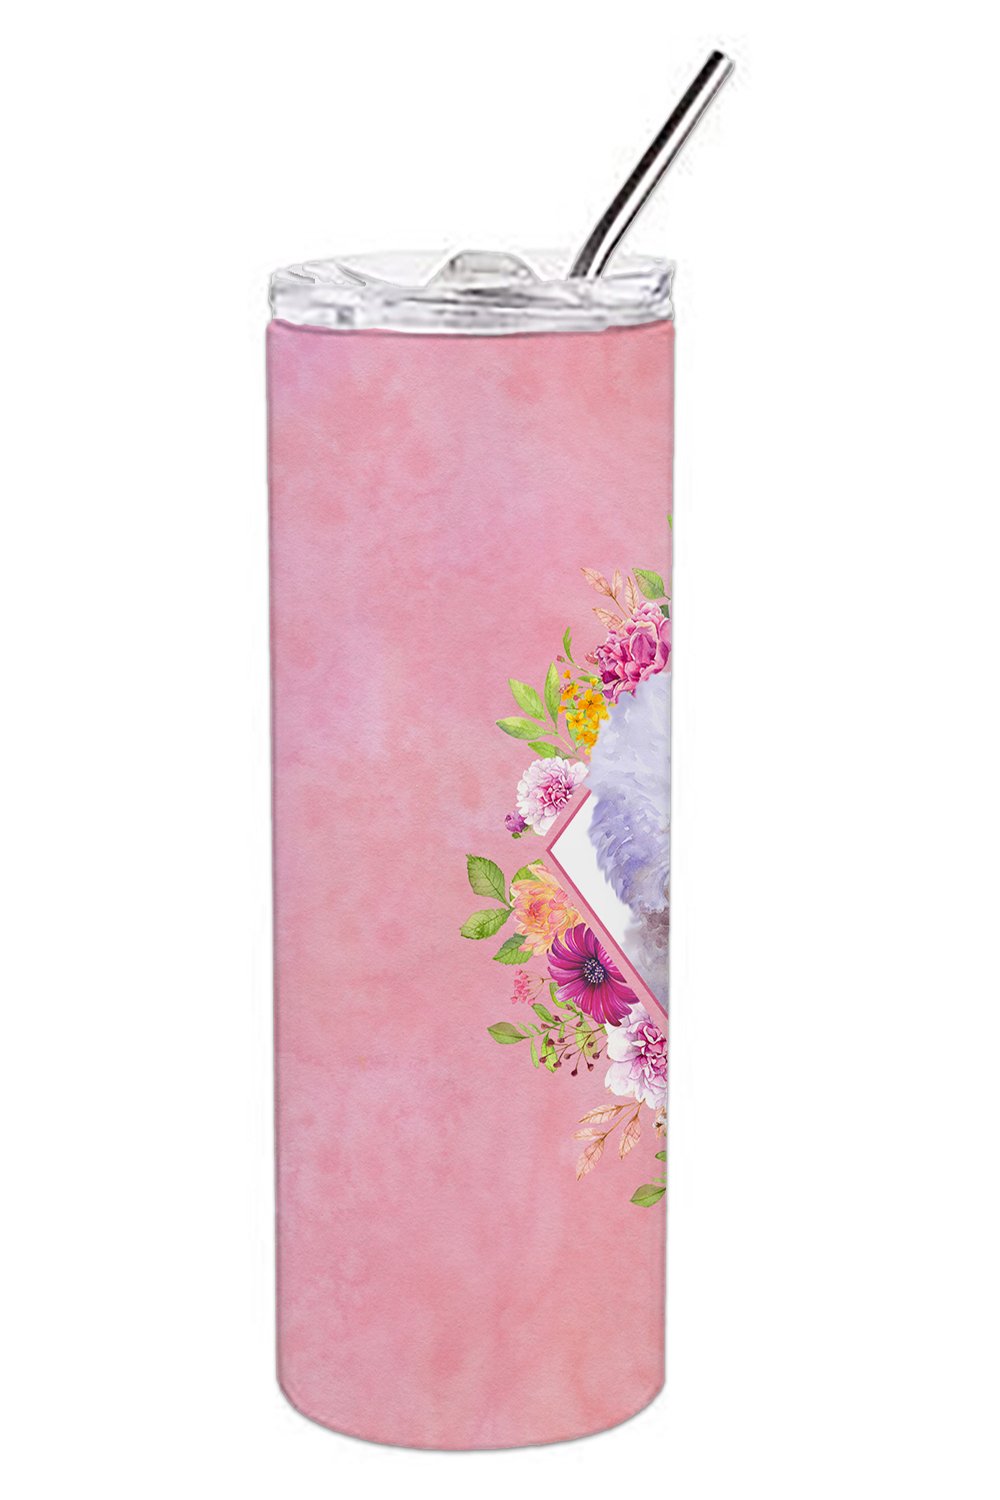 Bichon Frisé #2 Pink Flowers Double Walled Stainless Steel 20 oz Skinny Tumbler CK4120TBL20 by Caroline's Treasures